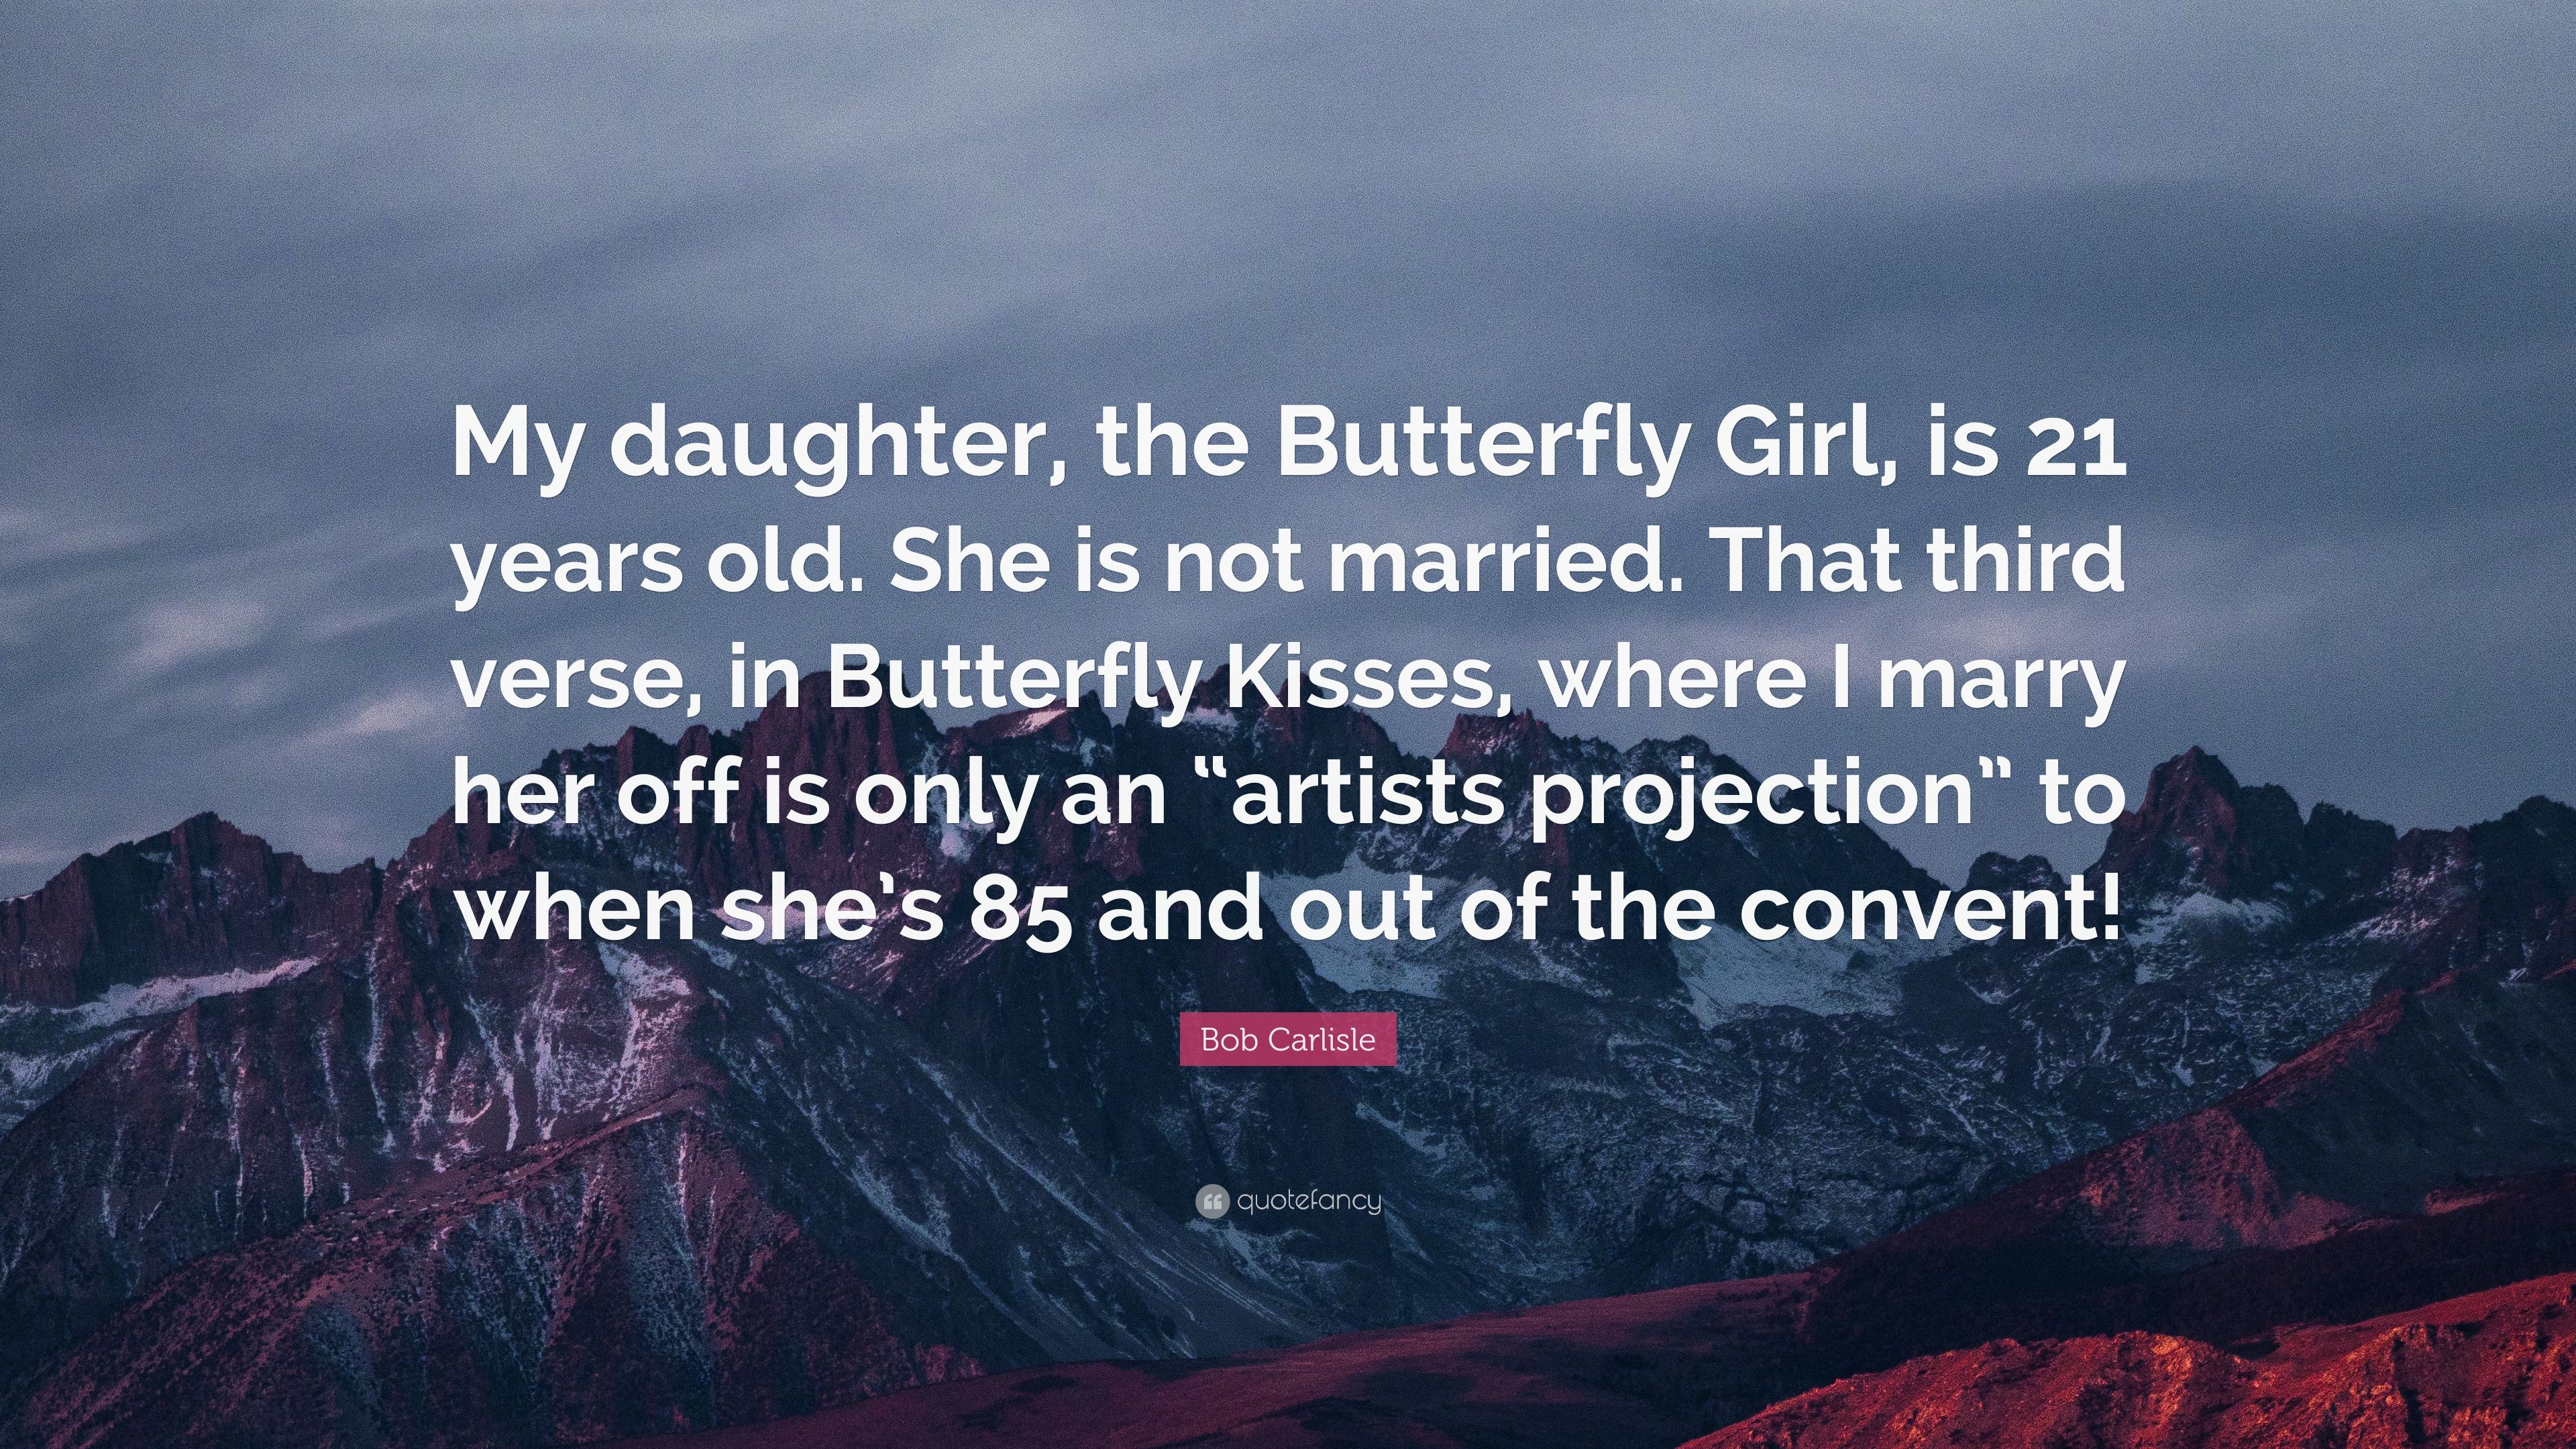 Bob Carlisle Quote: “My daughter, the Butterfly Girl, is 21 years